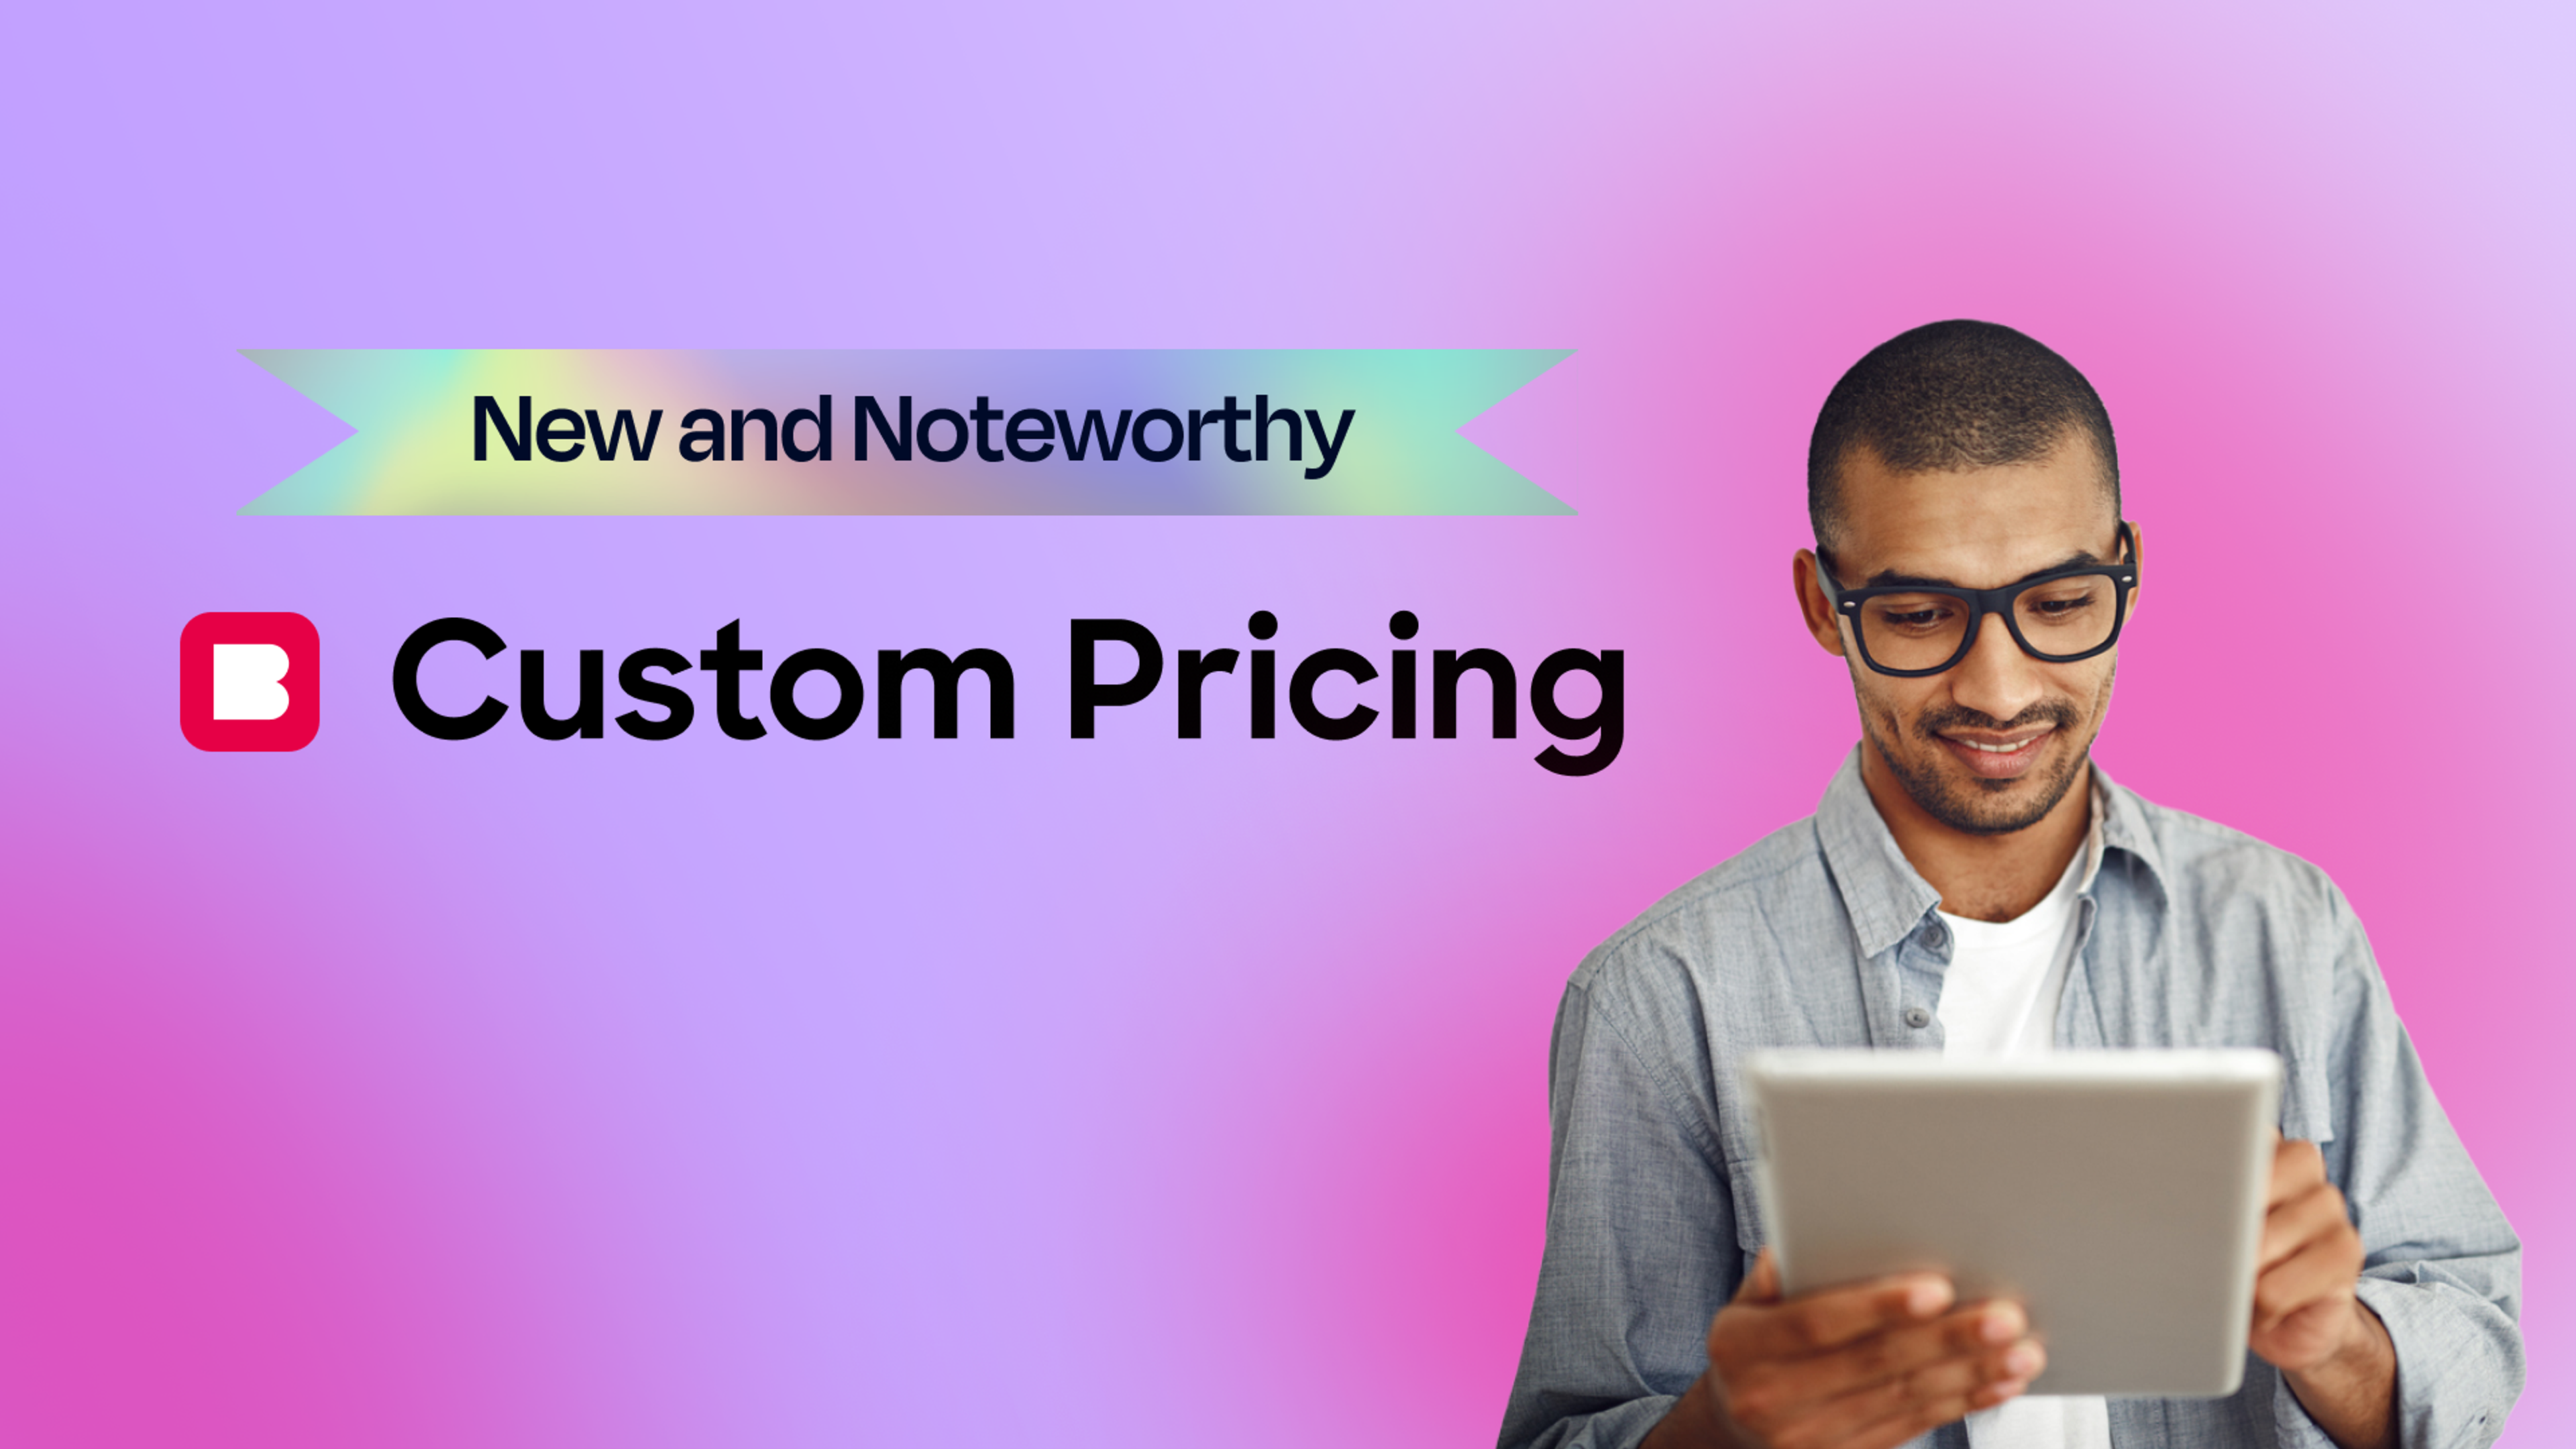 New and Noteworthy updates from Bold's Custom Pricing App for Shopify